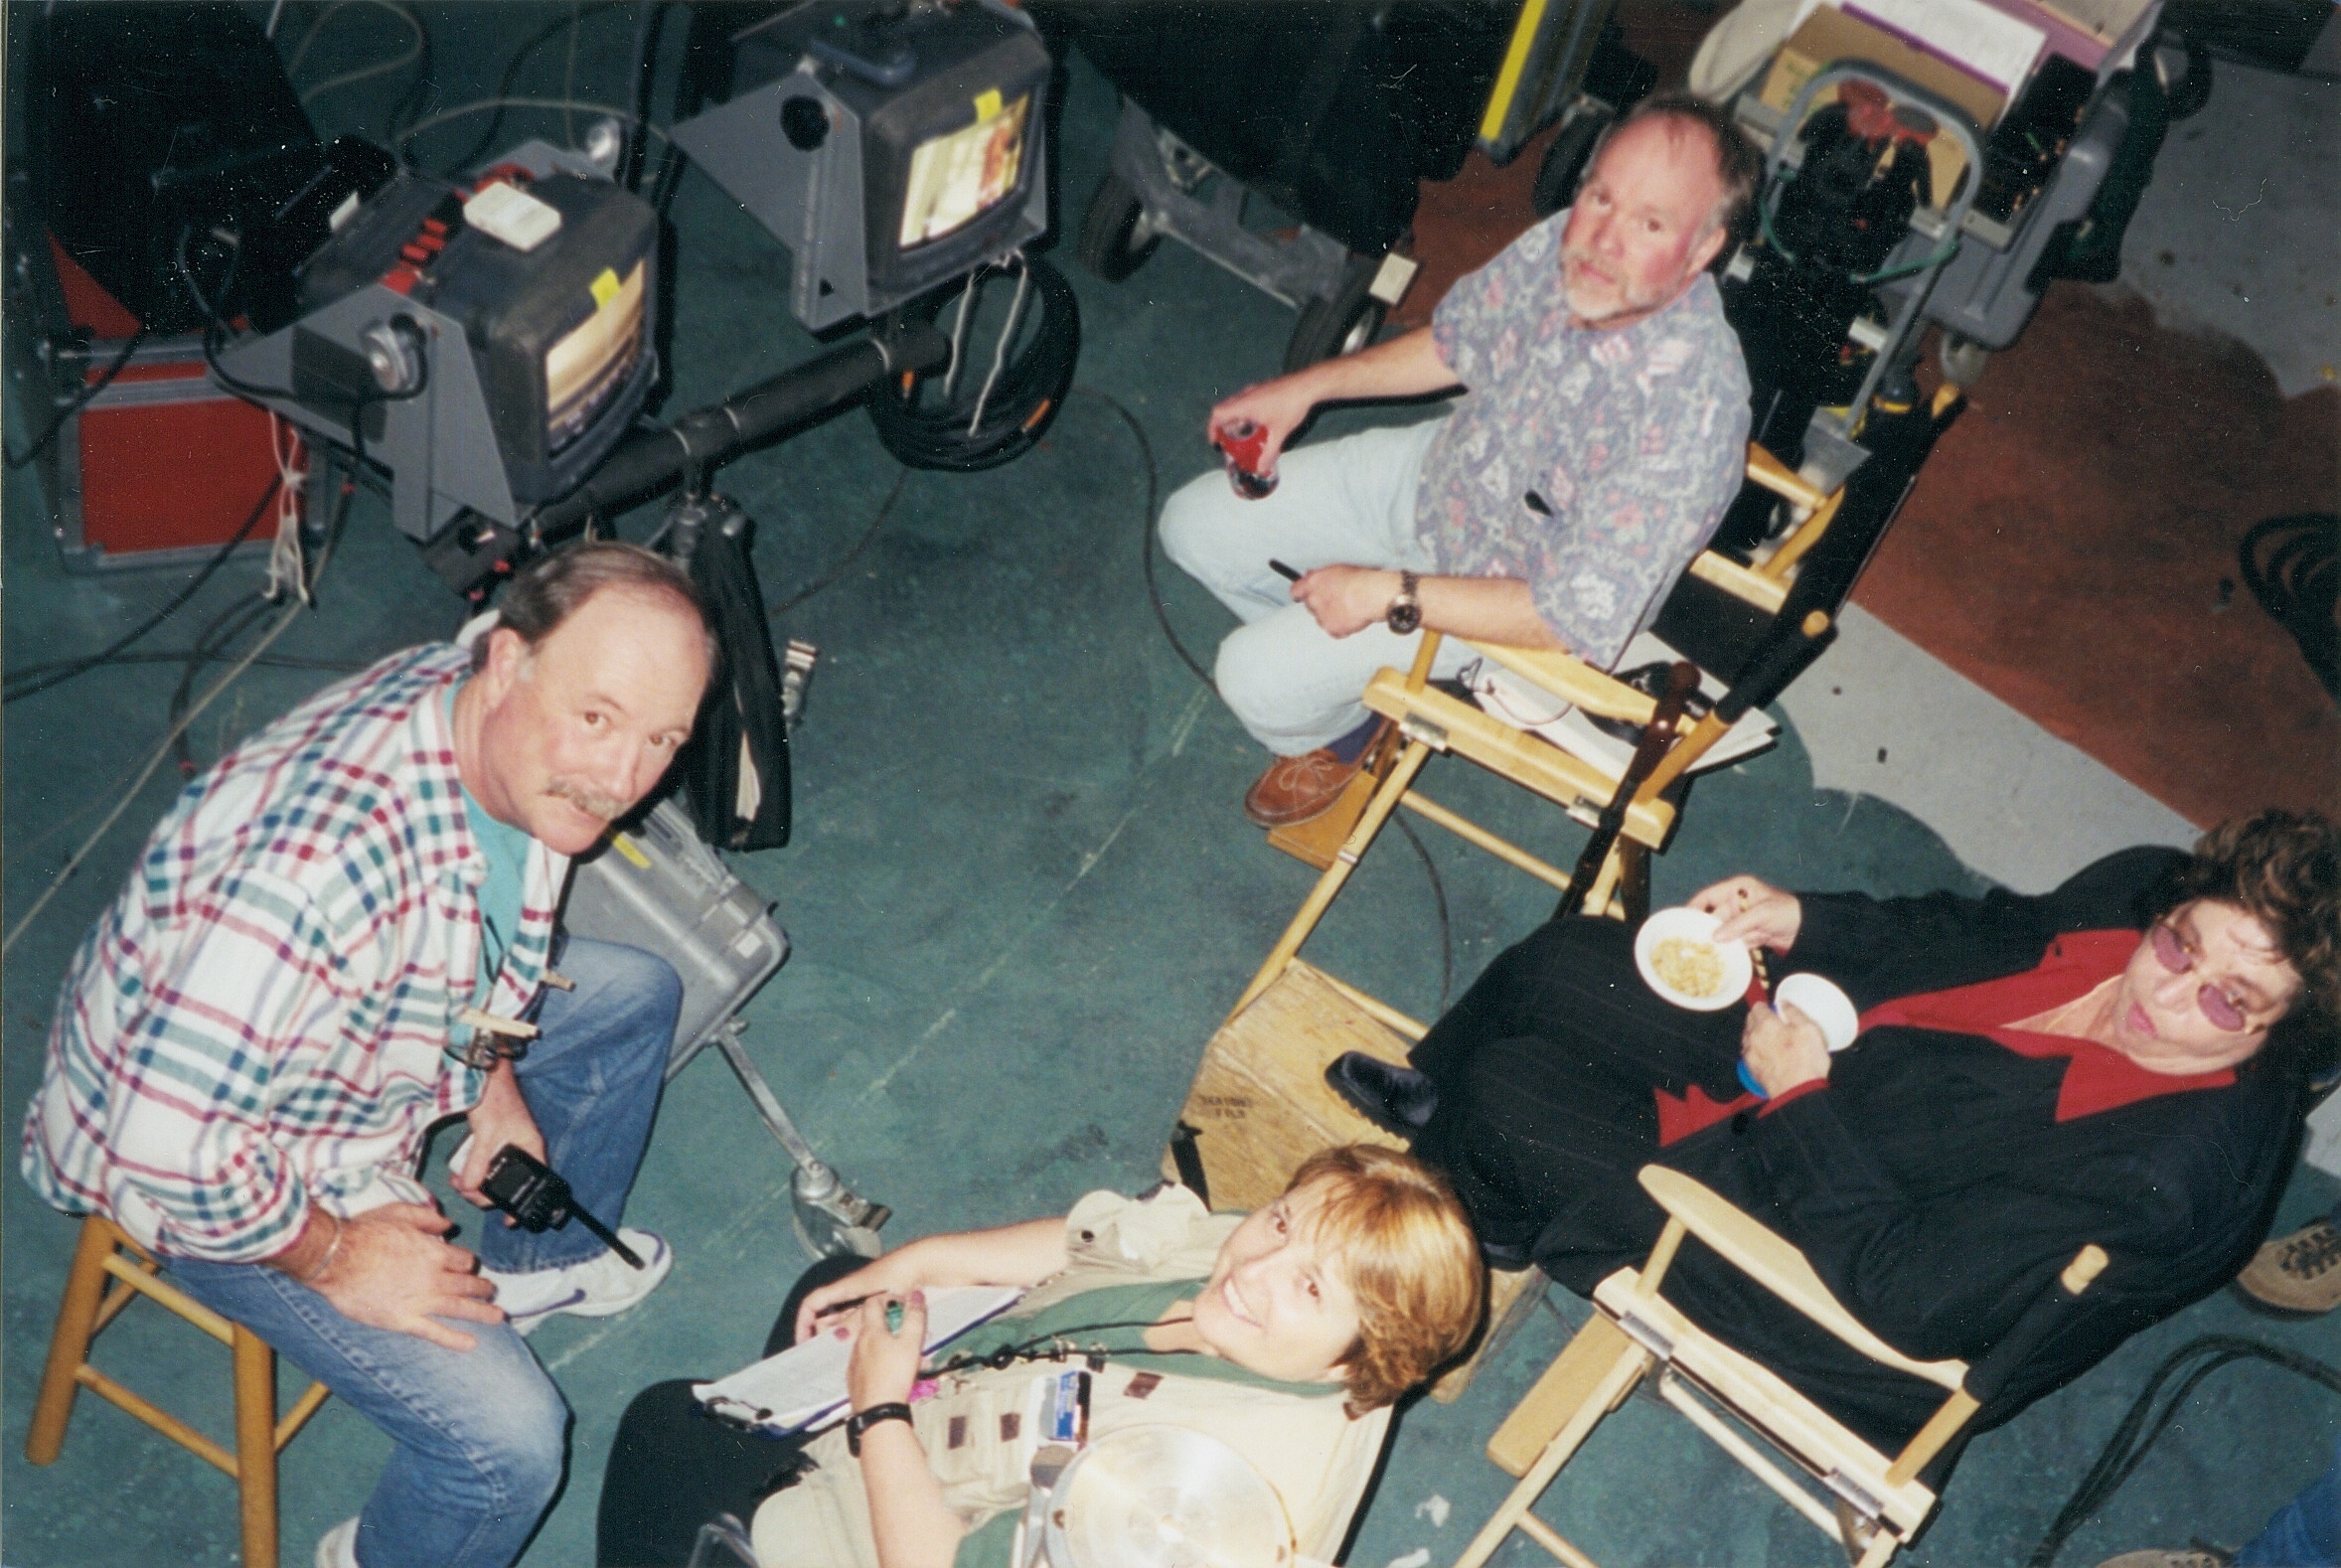 Tom Logan directing on the set of BLOODHOUNDS, INC. at Glendale Studios in Los Angeles.